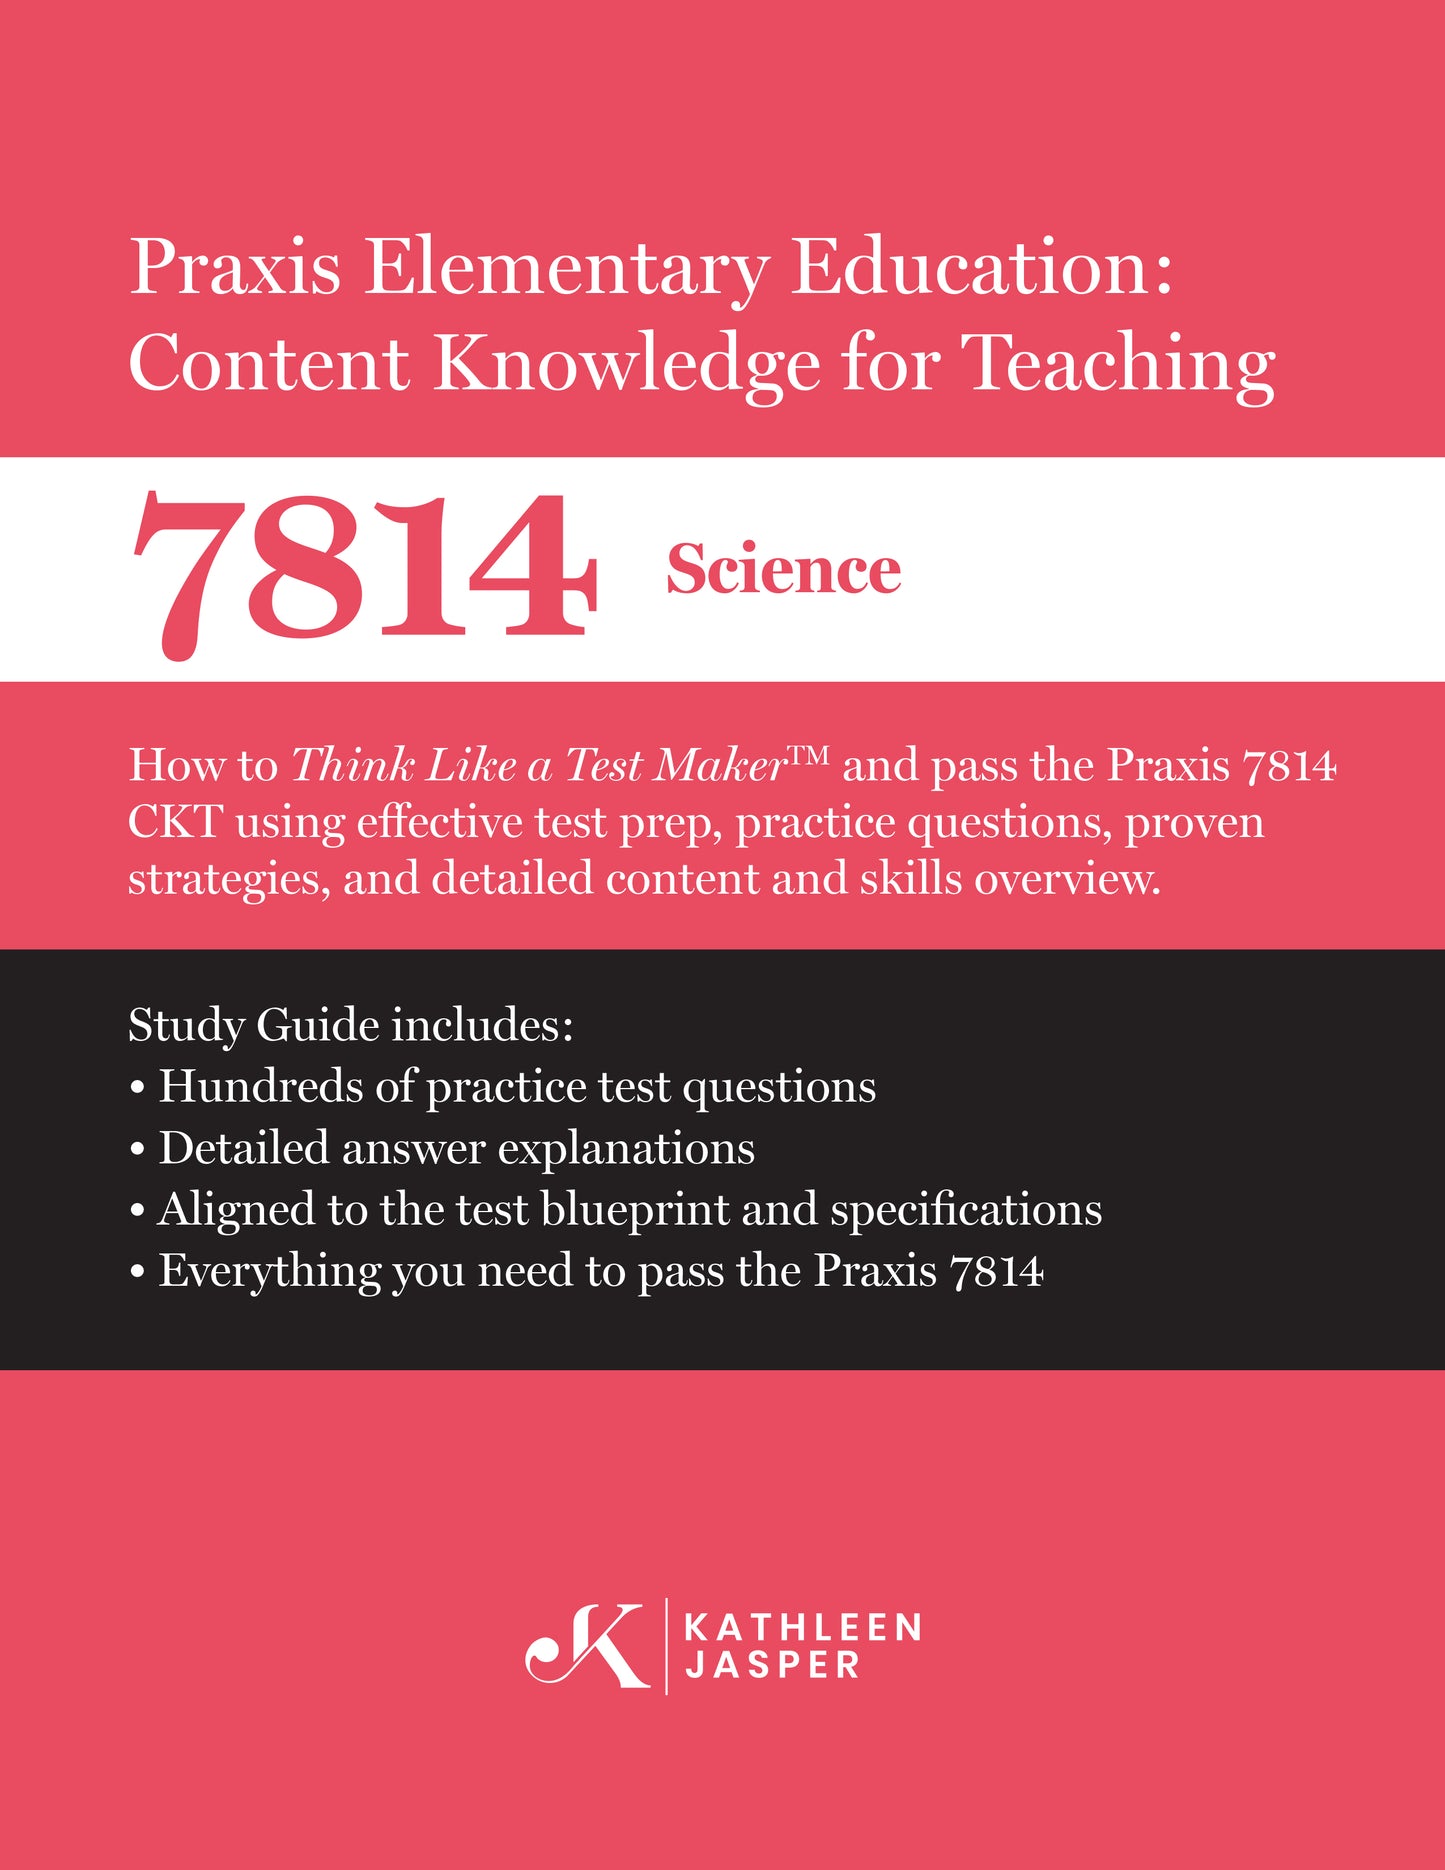 Praxis Elementary Education Content Knowledge for Teaching 7814 Science